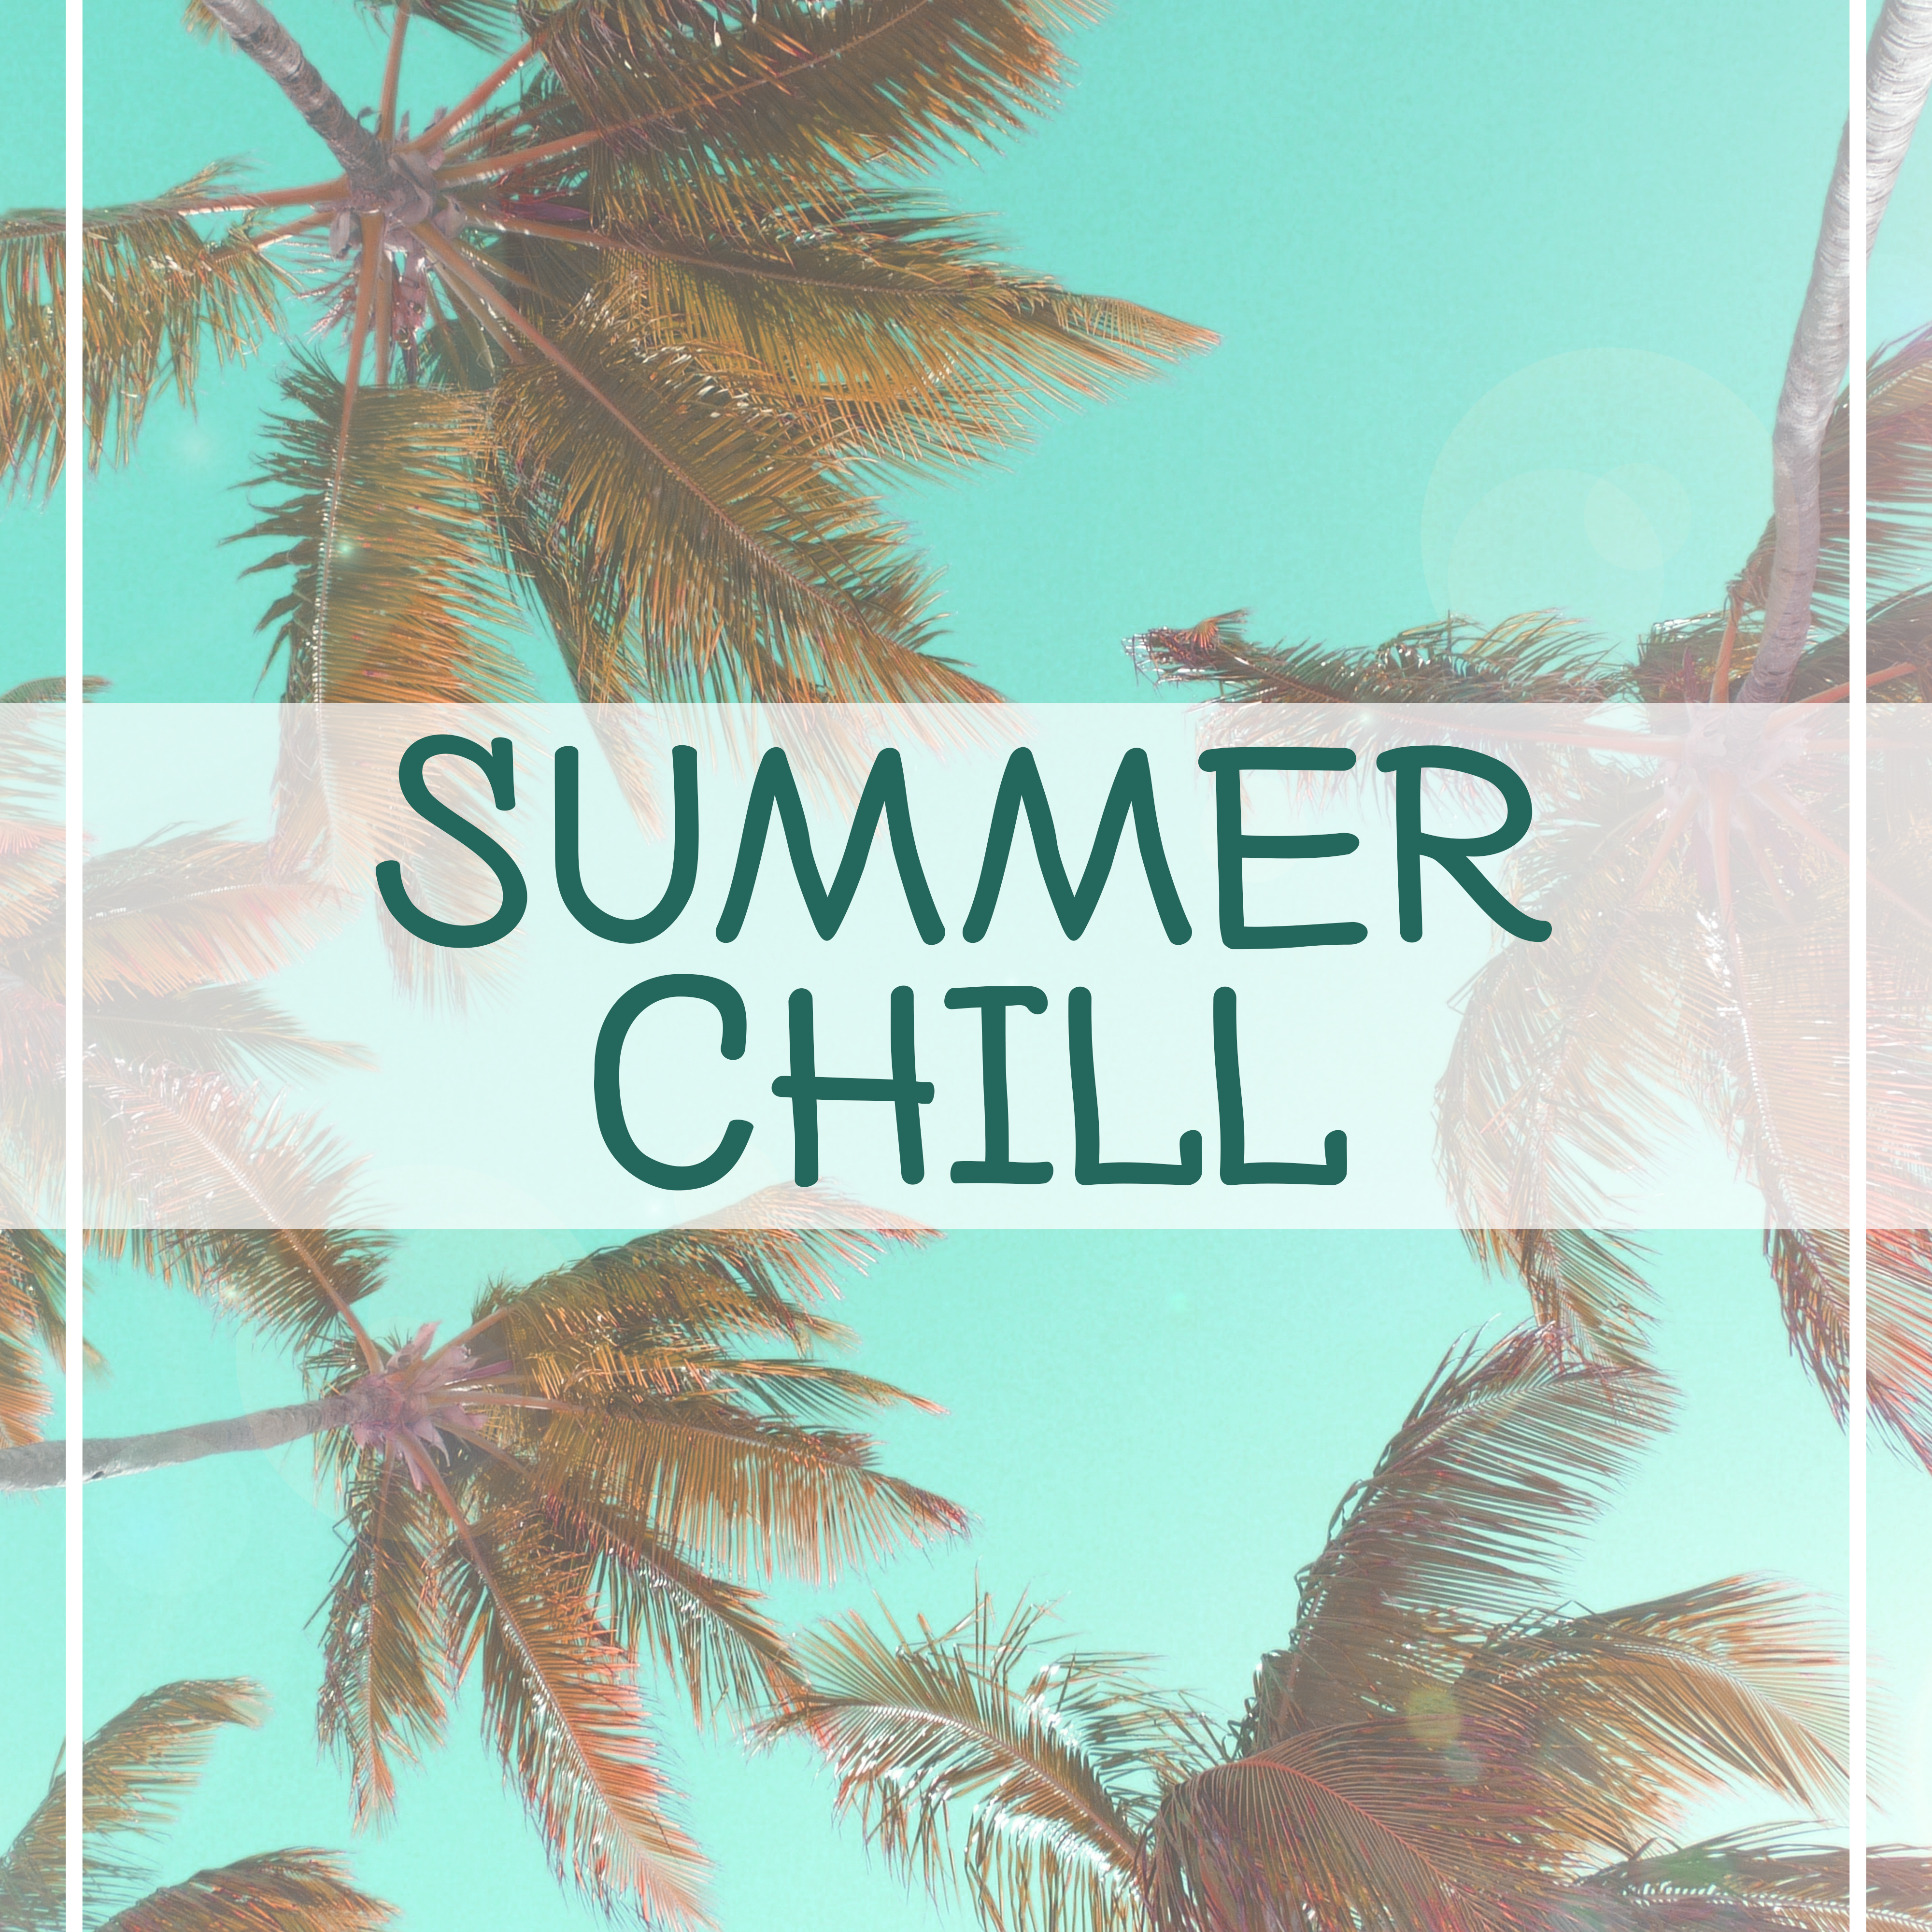 Summer Chill – Beach Party, Relax on the Beach, Chillout Hits, Holiday Songs, Deep Relax, Positive Vibrations